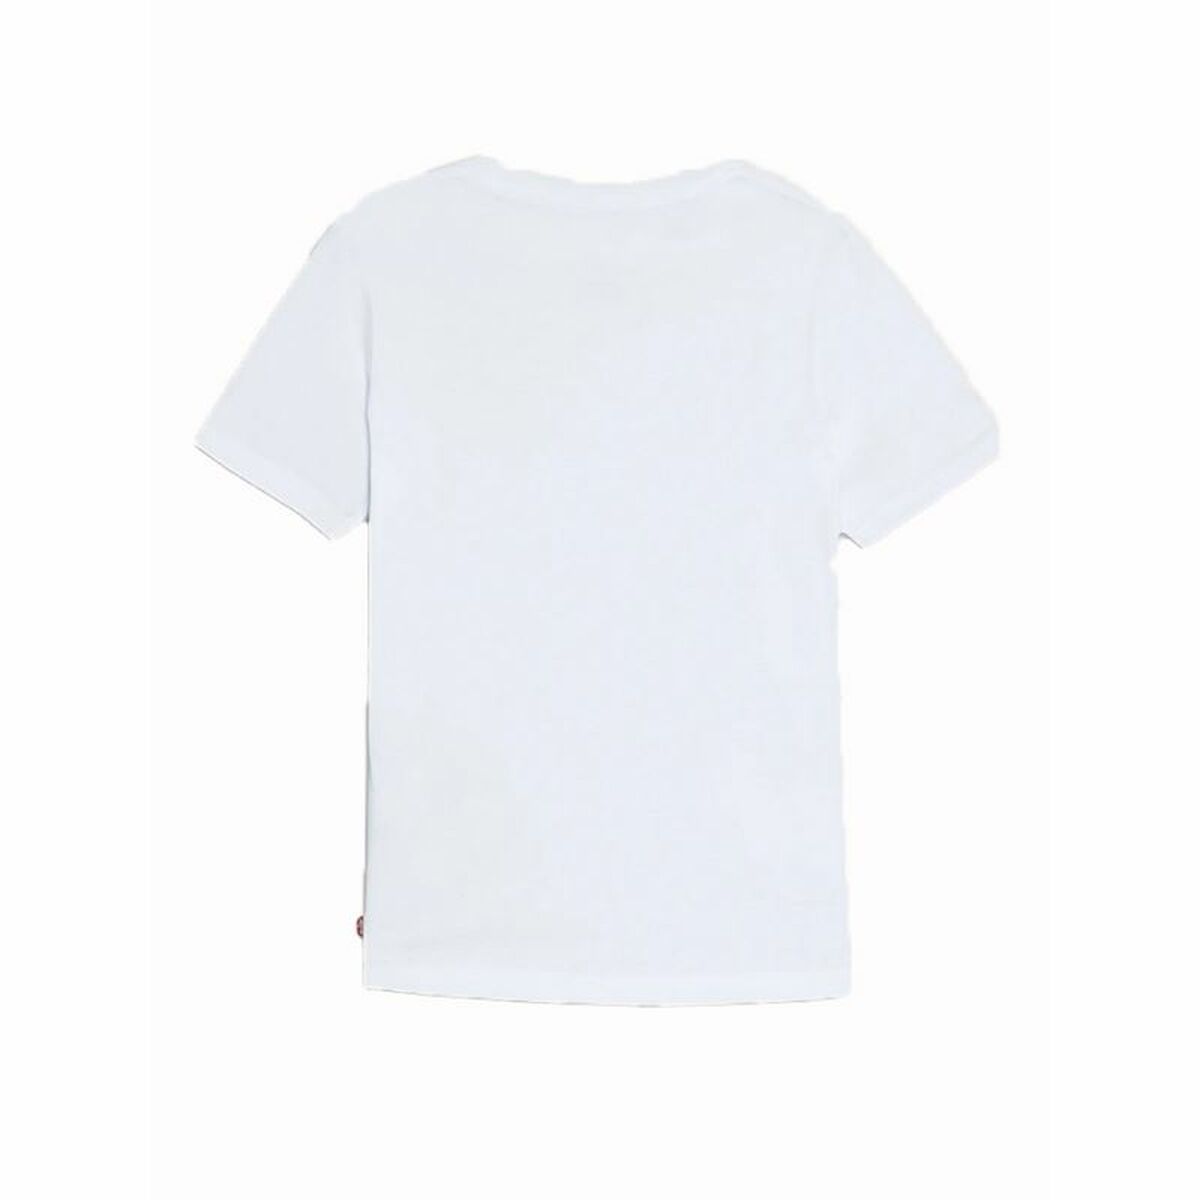 T-shirt Levi's  Batwing Chest White